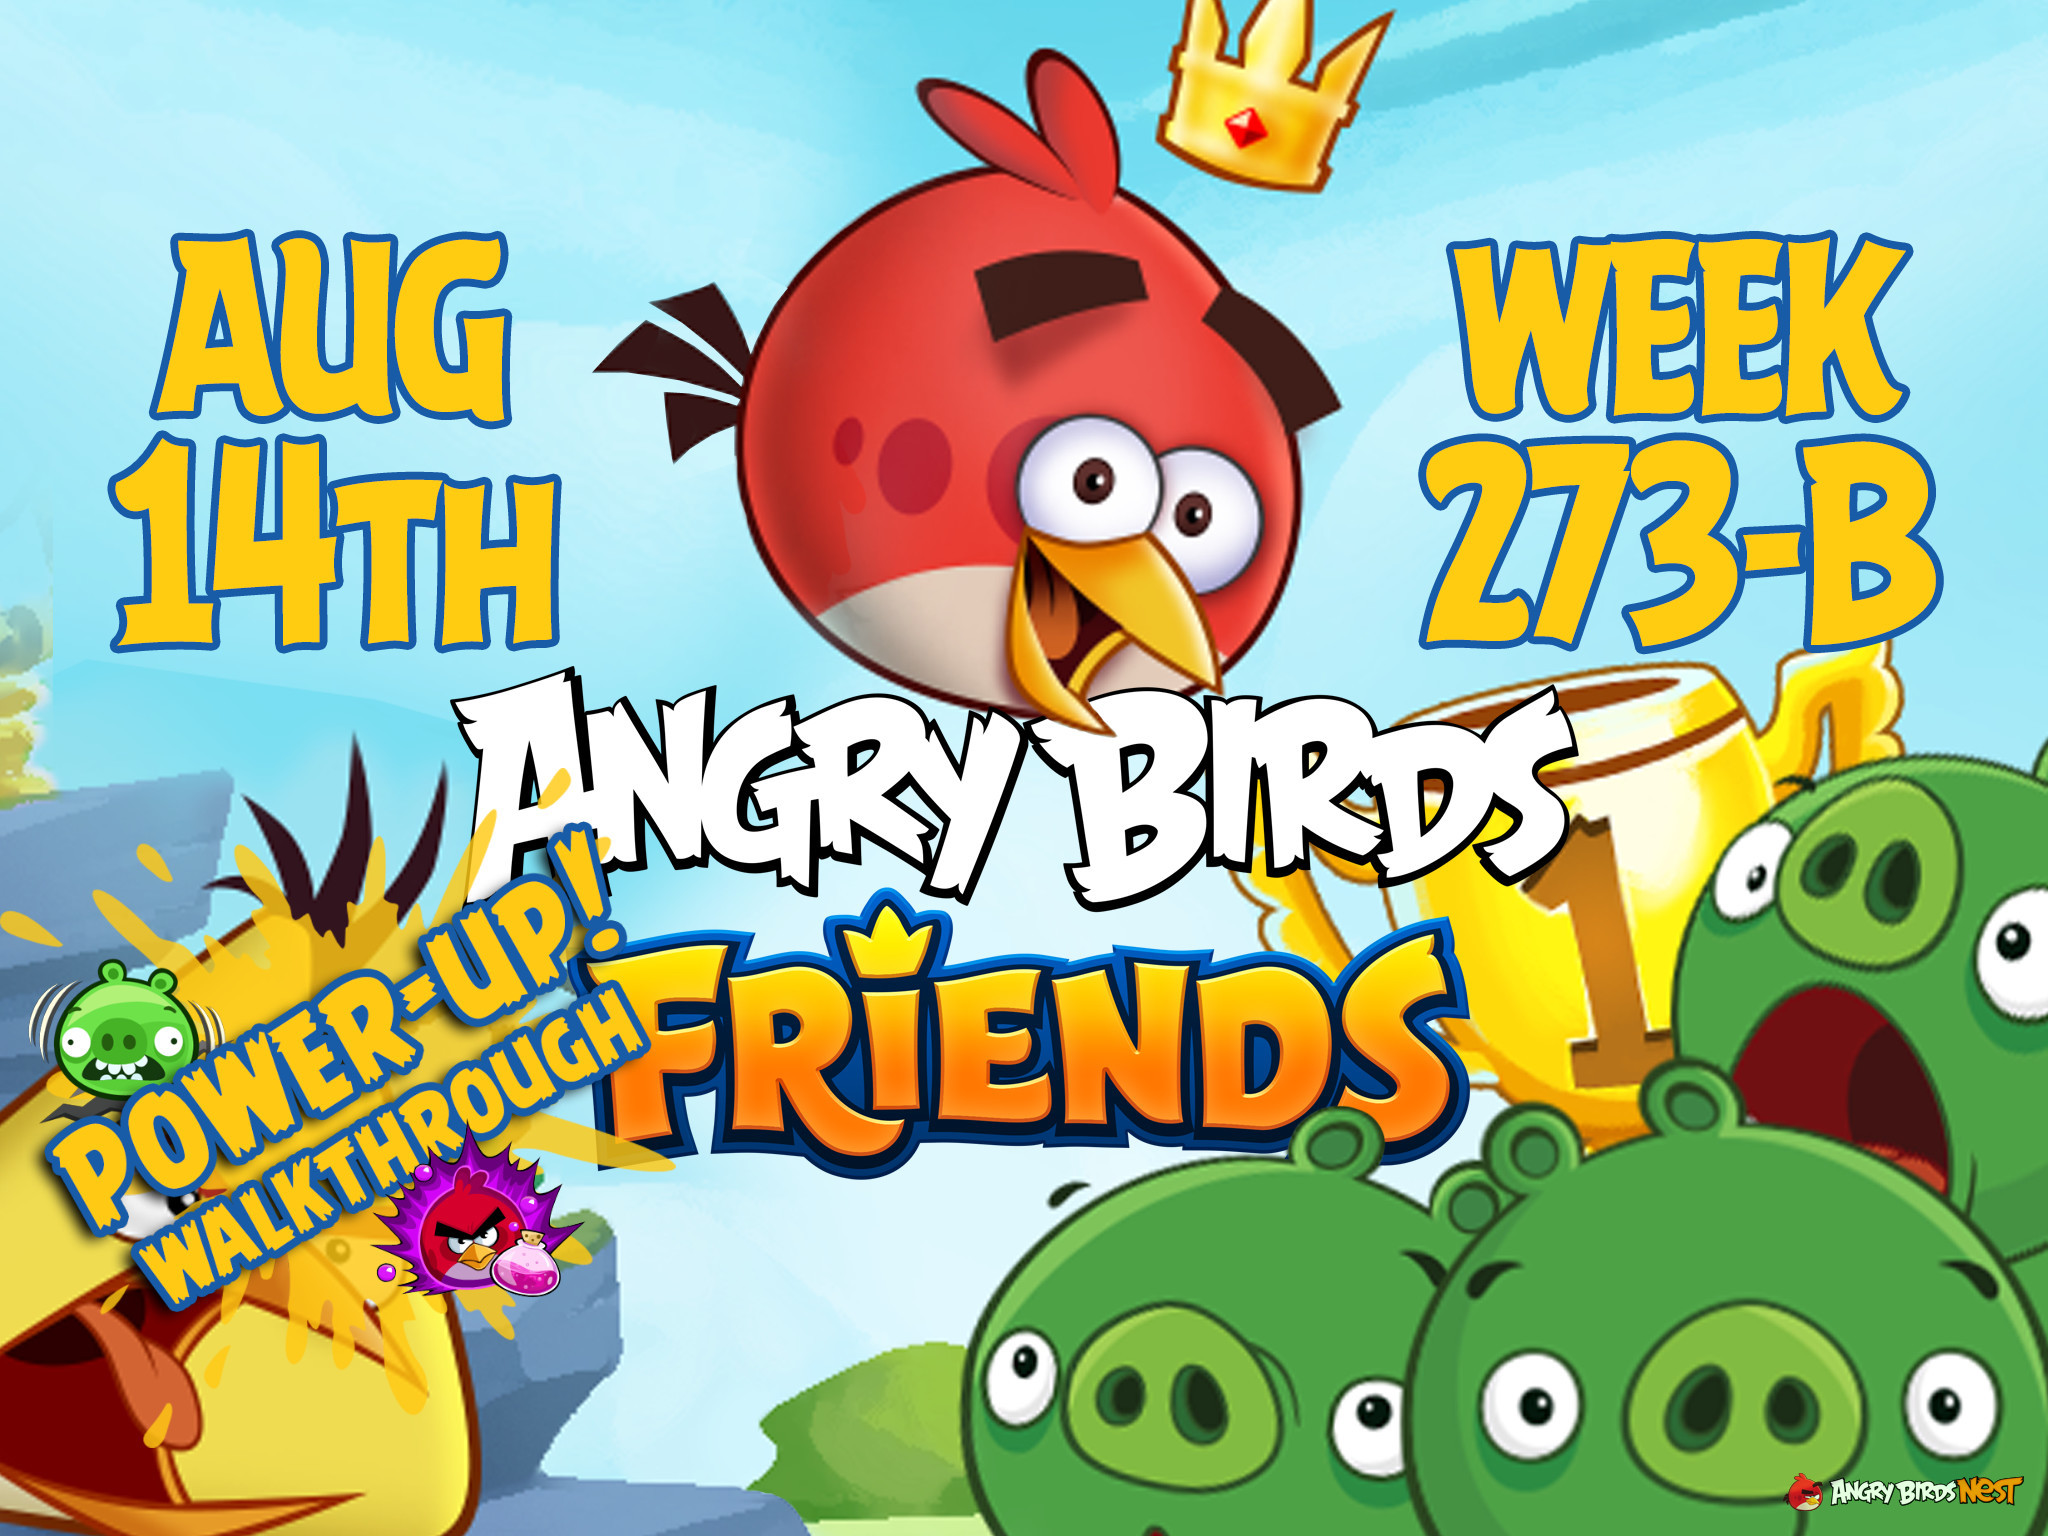 Angry Birds Friends Tournament Week 273-B Feature Image PU